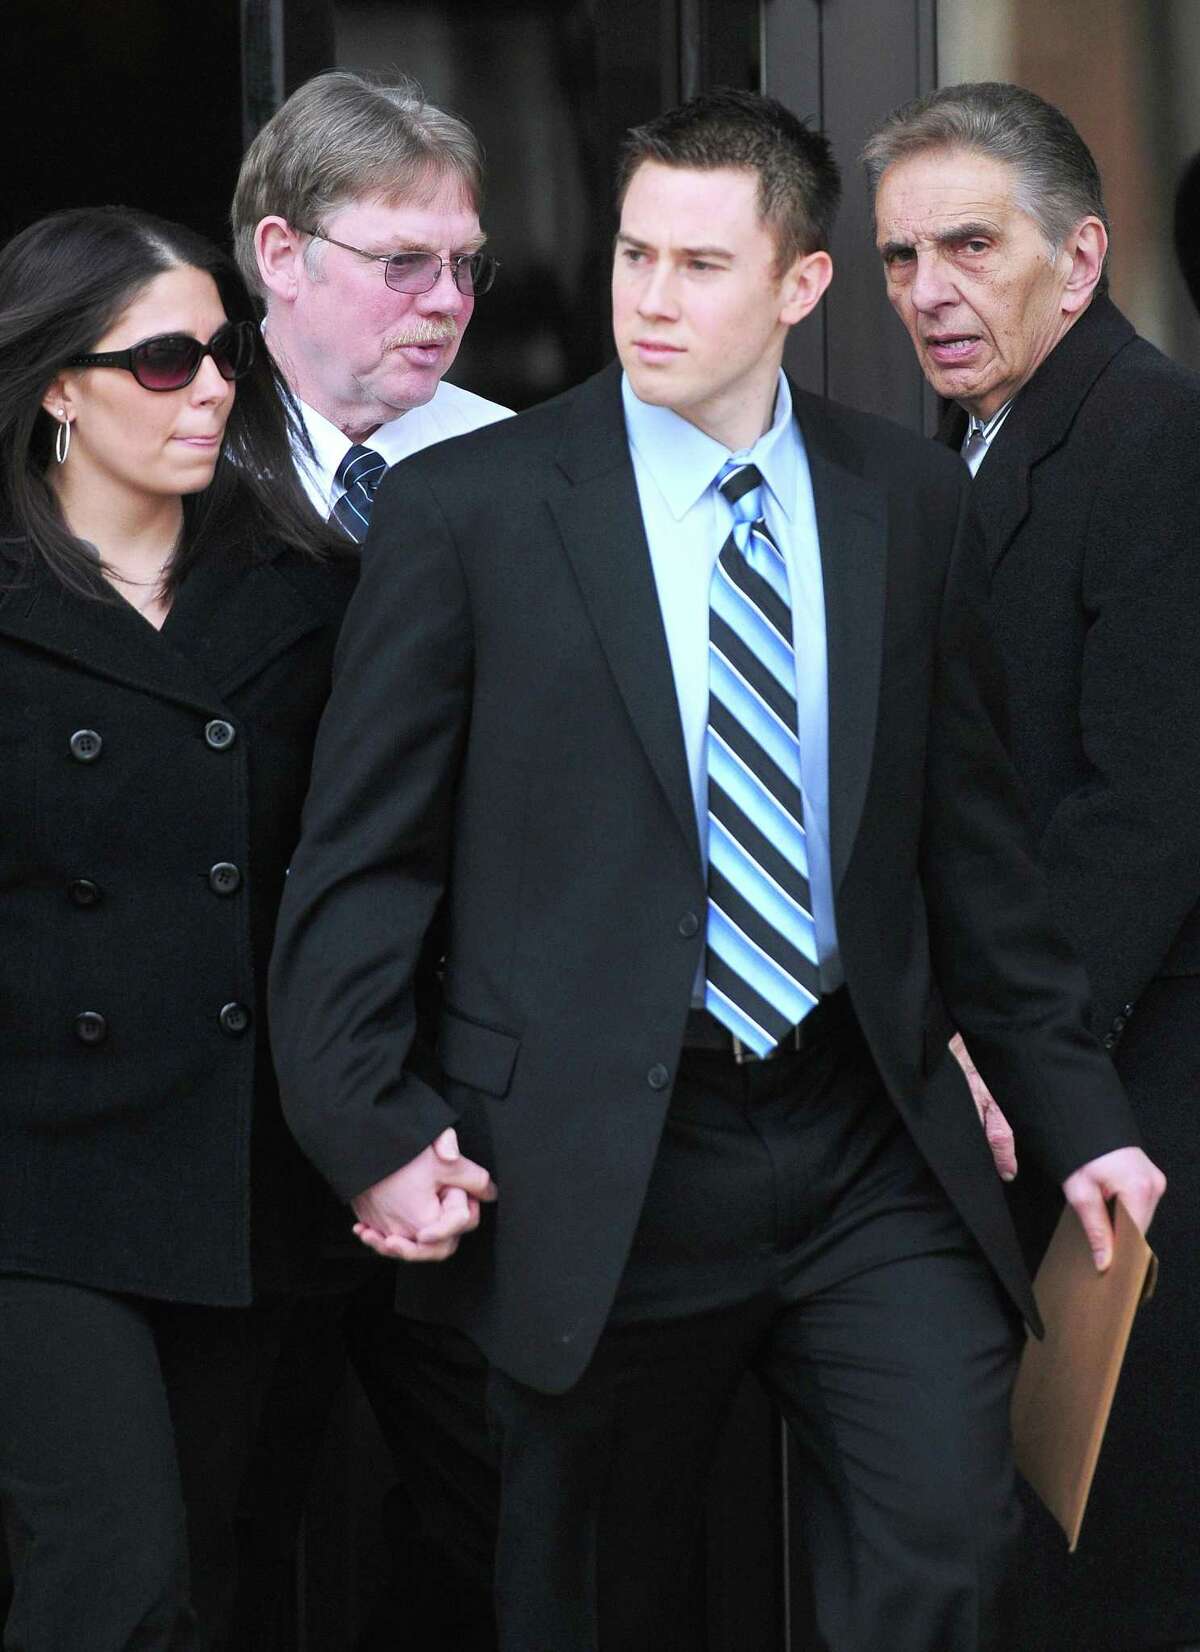 East Haven Police Officer Dennis Spaulding (second from right) walks out of U.S. District Court in Bridgeport after a bail hearing on 2/14/2012. Photo by Arnold Gold/New Haven Register AG0439D